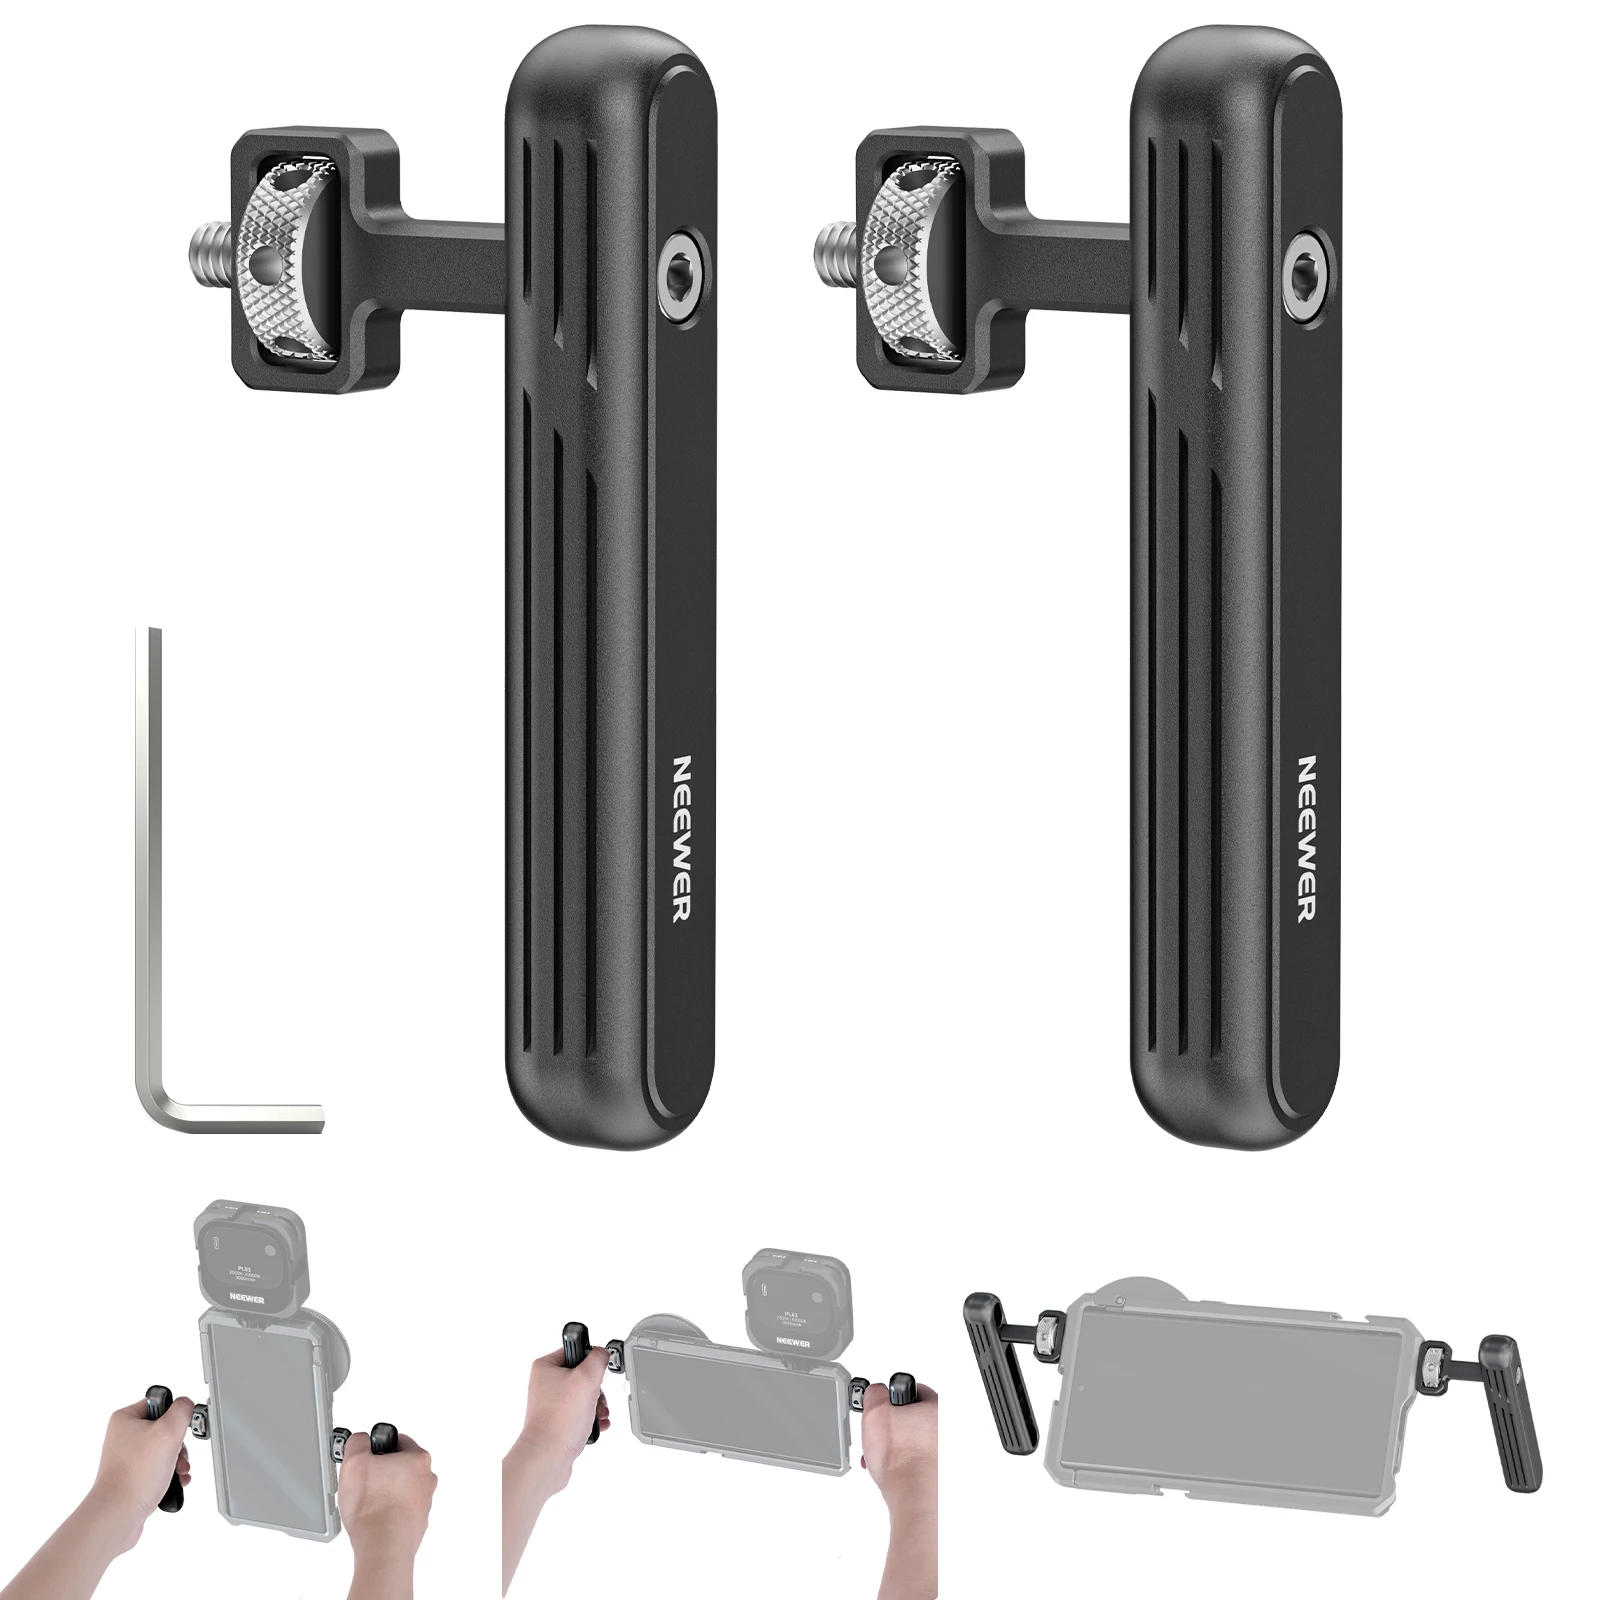 

NEEWER 2PACK Rotatable Side Handle/Top Handle for Smartphone Video Rig Filming Equipment, Aluminum Grips with 1/4" Screws